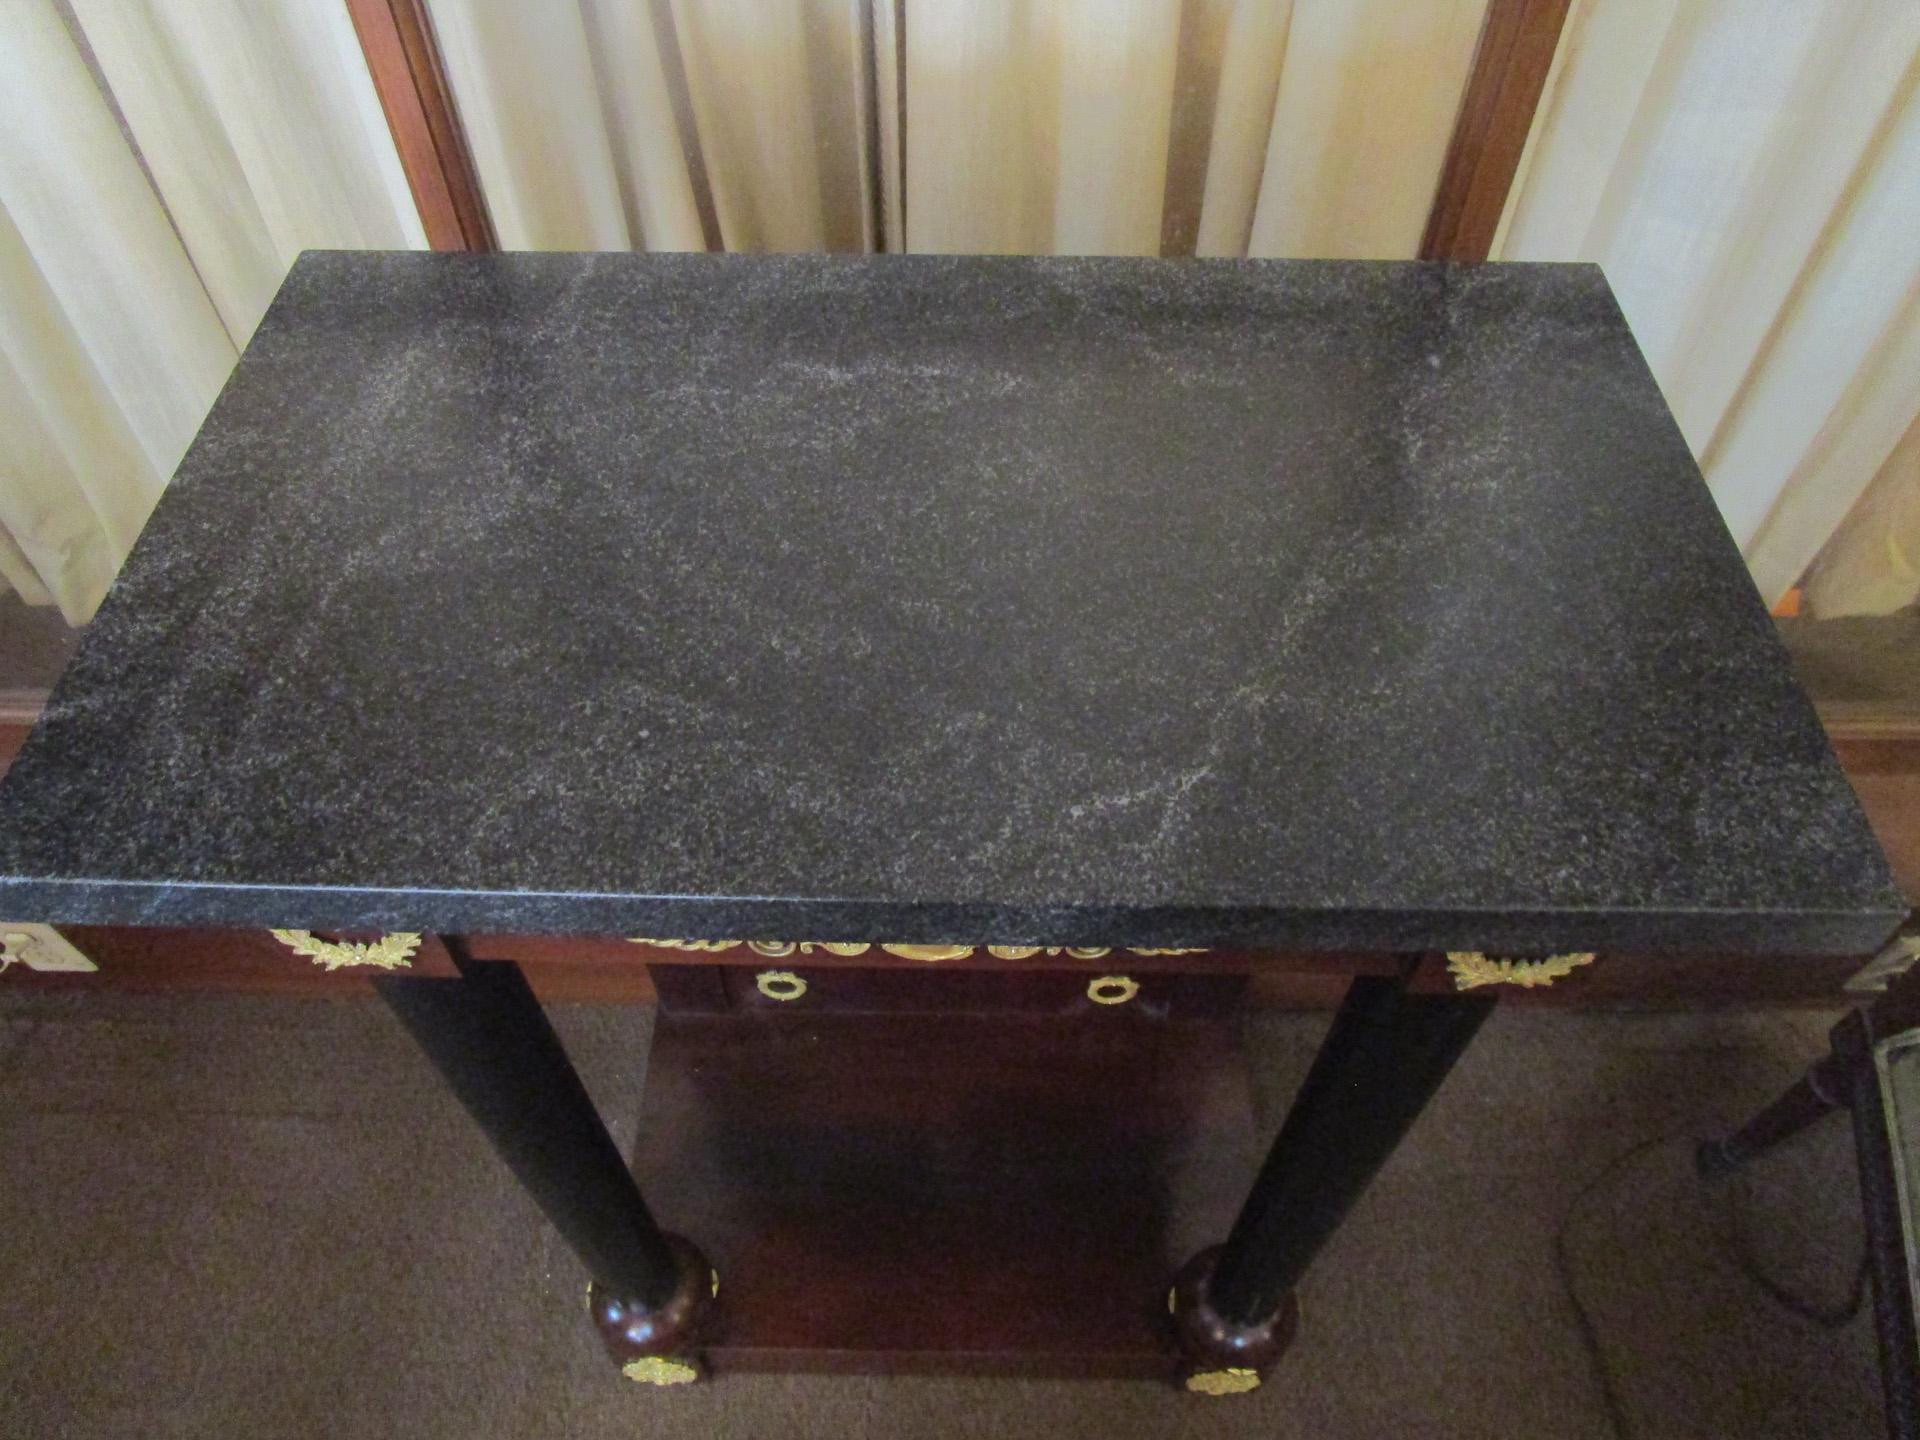 Brass French Empire Mahogany Table with Gold Gilt Ormolu Mounts and Black Granite Top For Sale